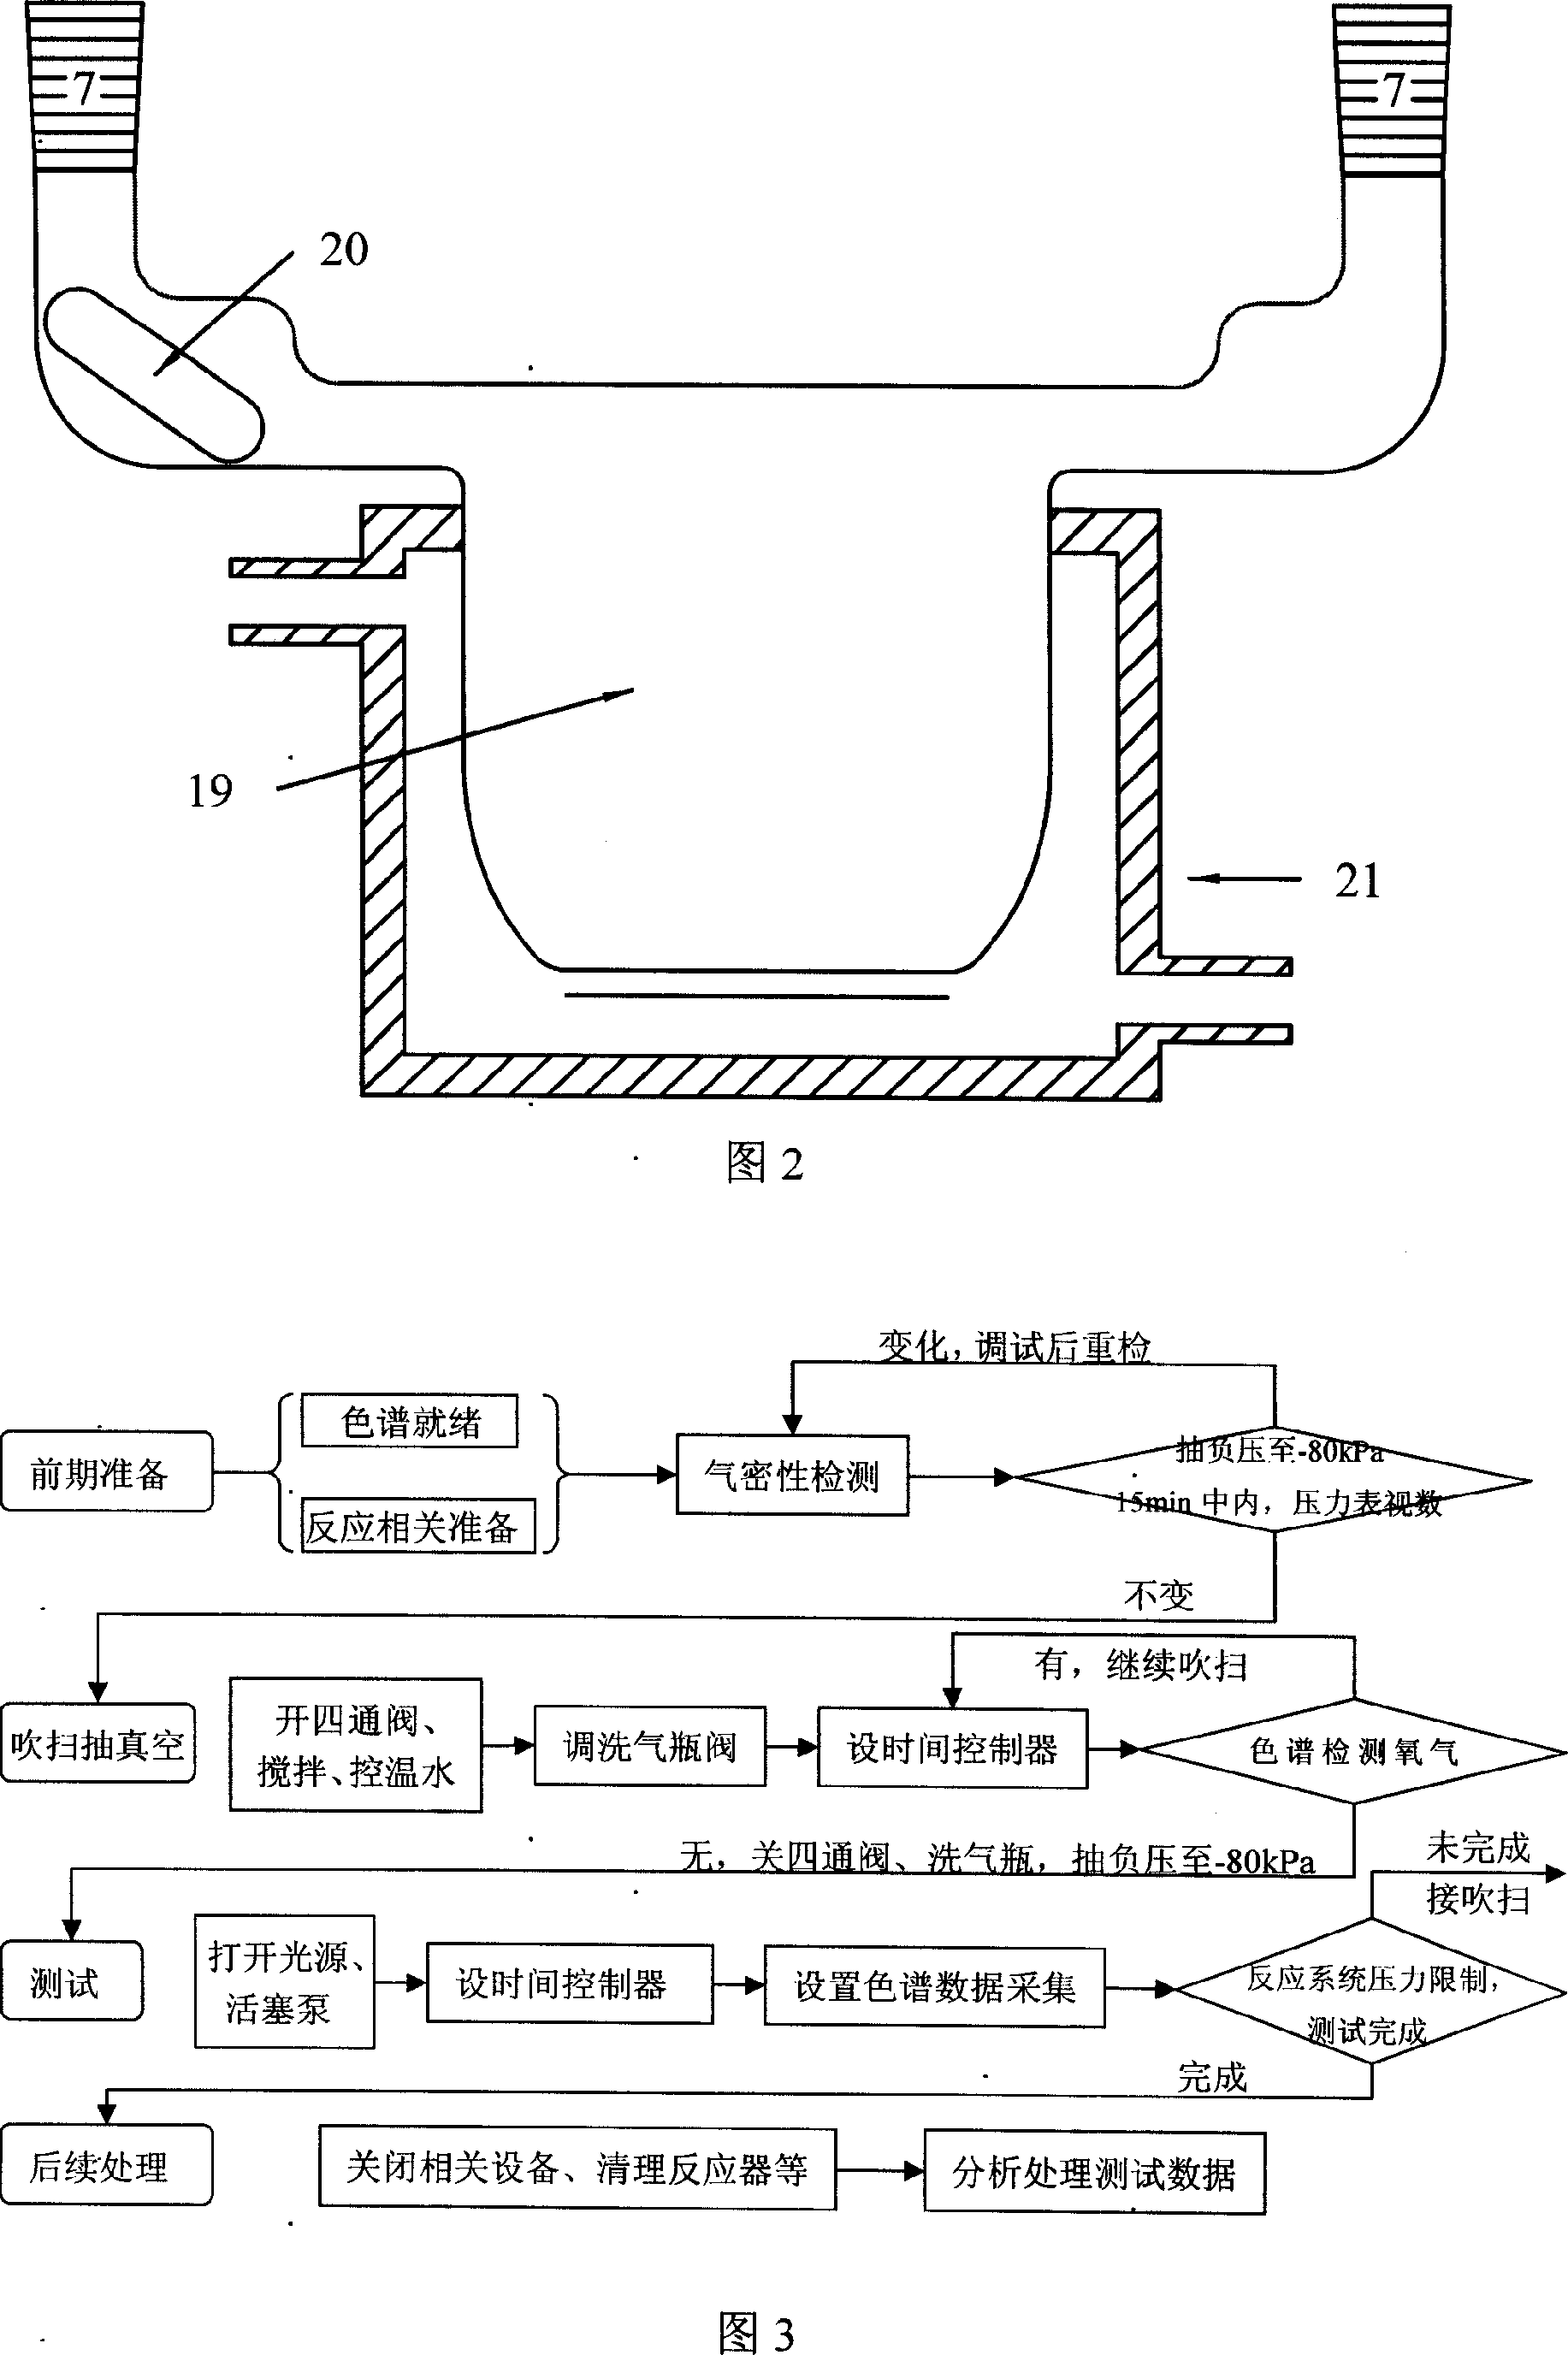 Light-catalyzed reaction negative-pressure loop circuit automatically testing system